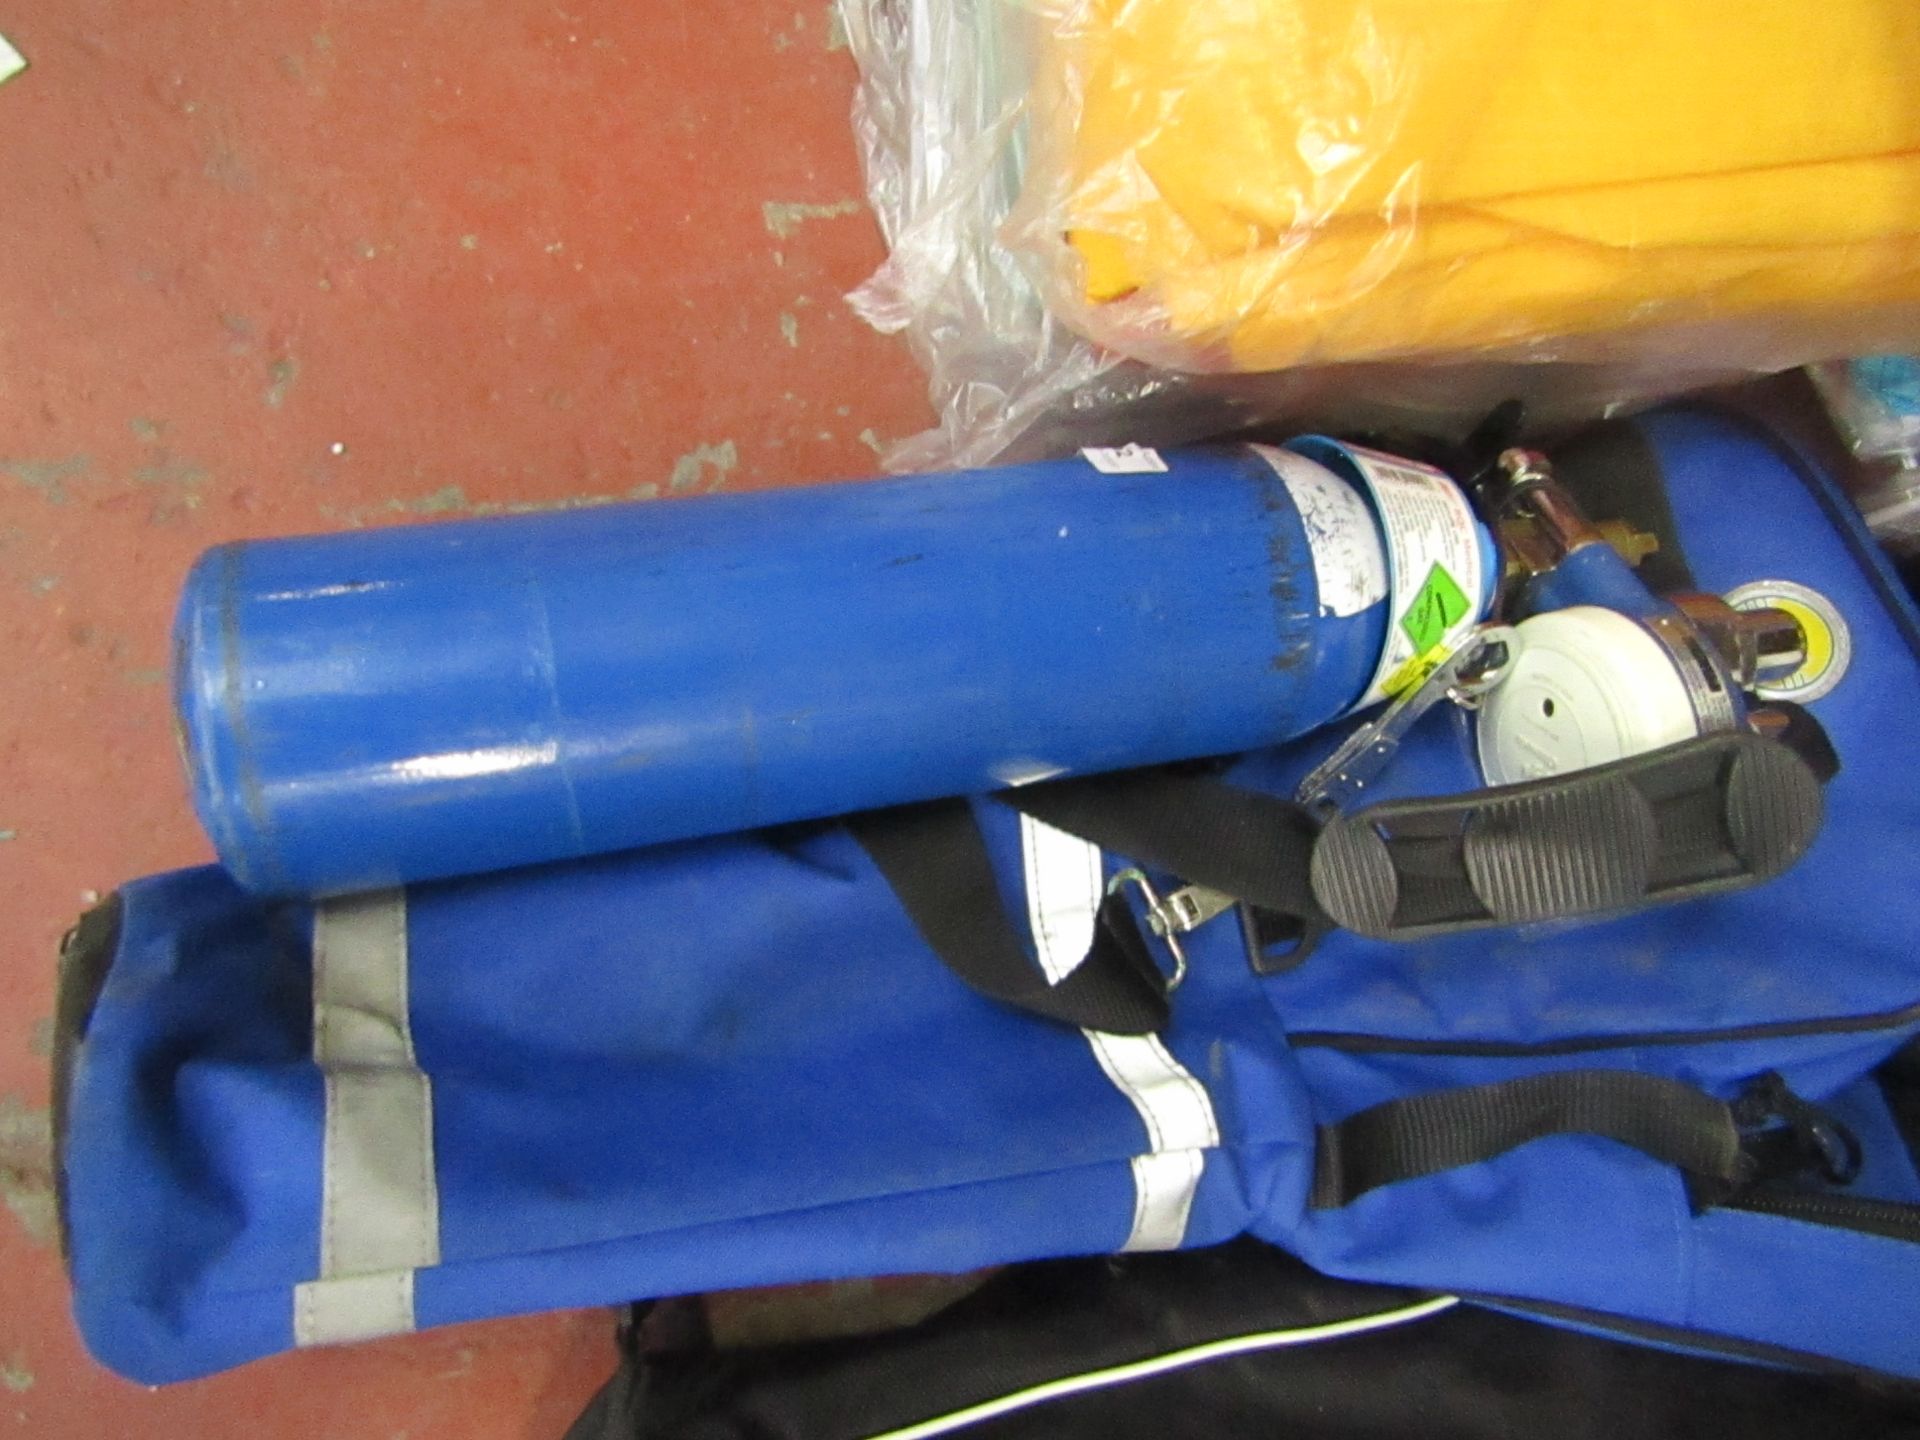 Nitrous Oxide and Oxygen compressed tank with carry case and accessories, unchecked.